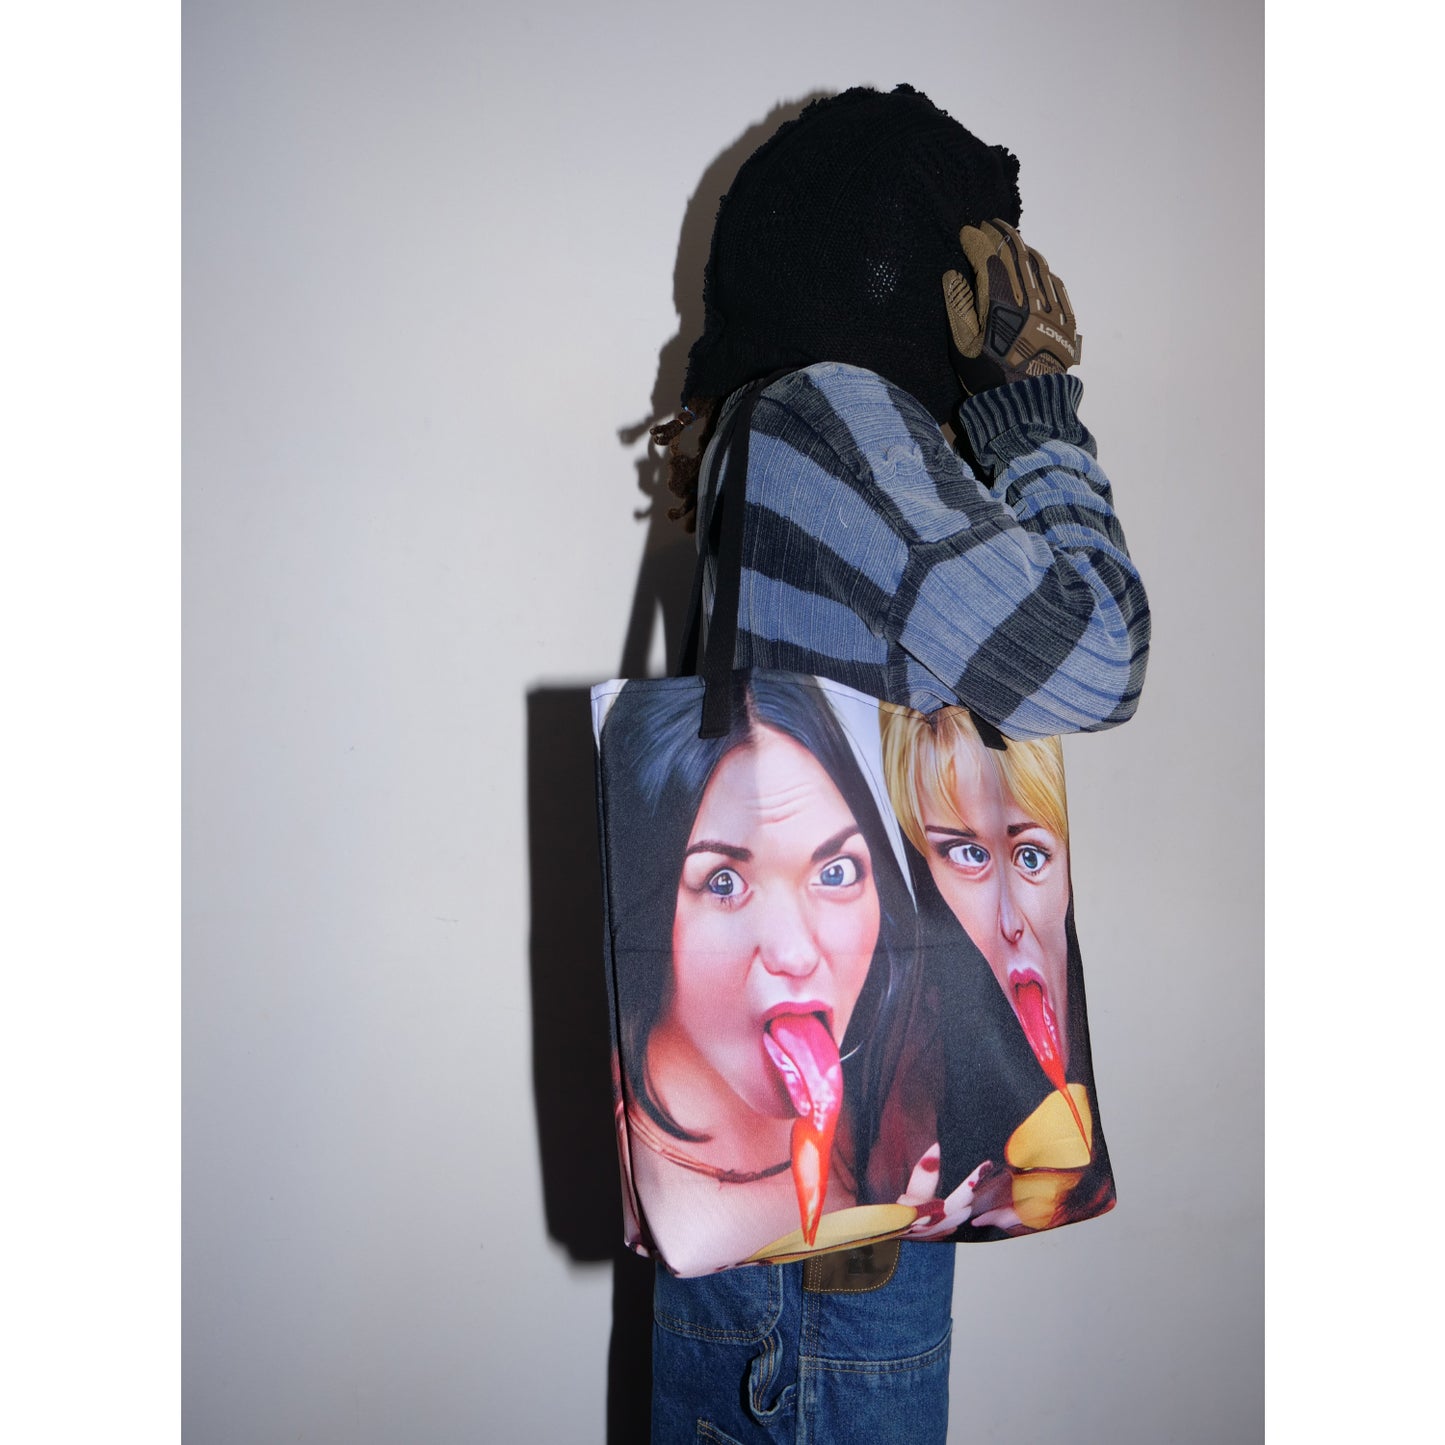 "D0UBLE TR0UBLE TWINZ" tote bag